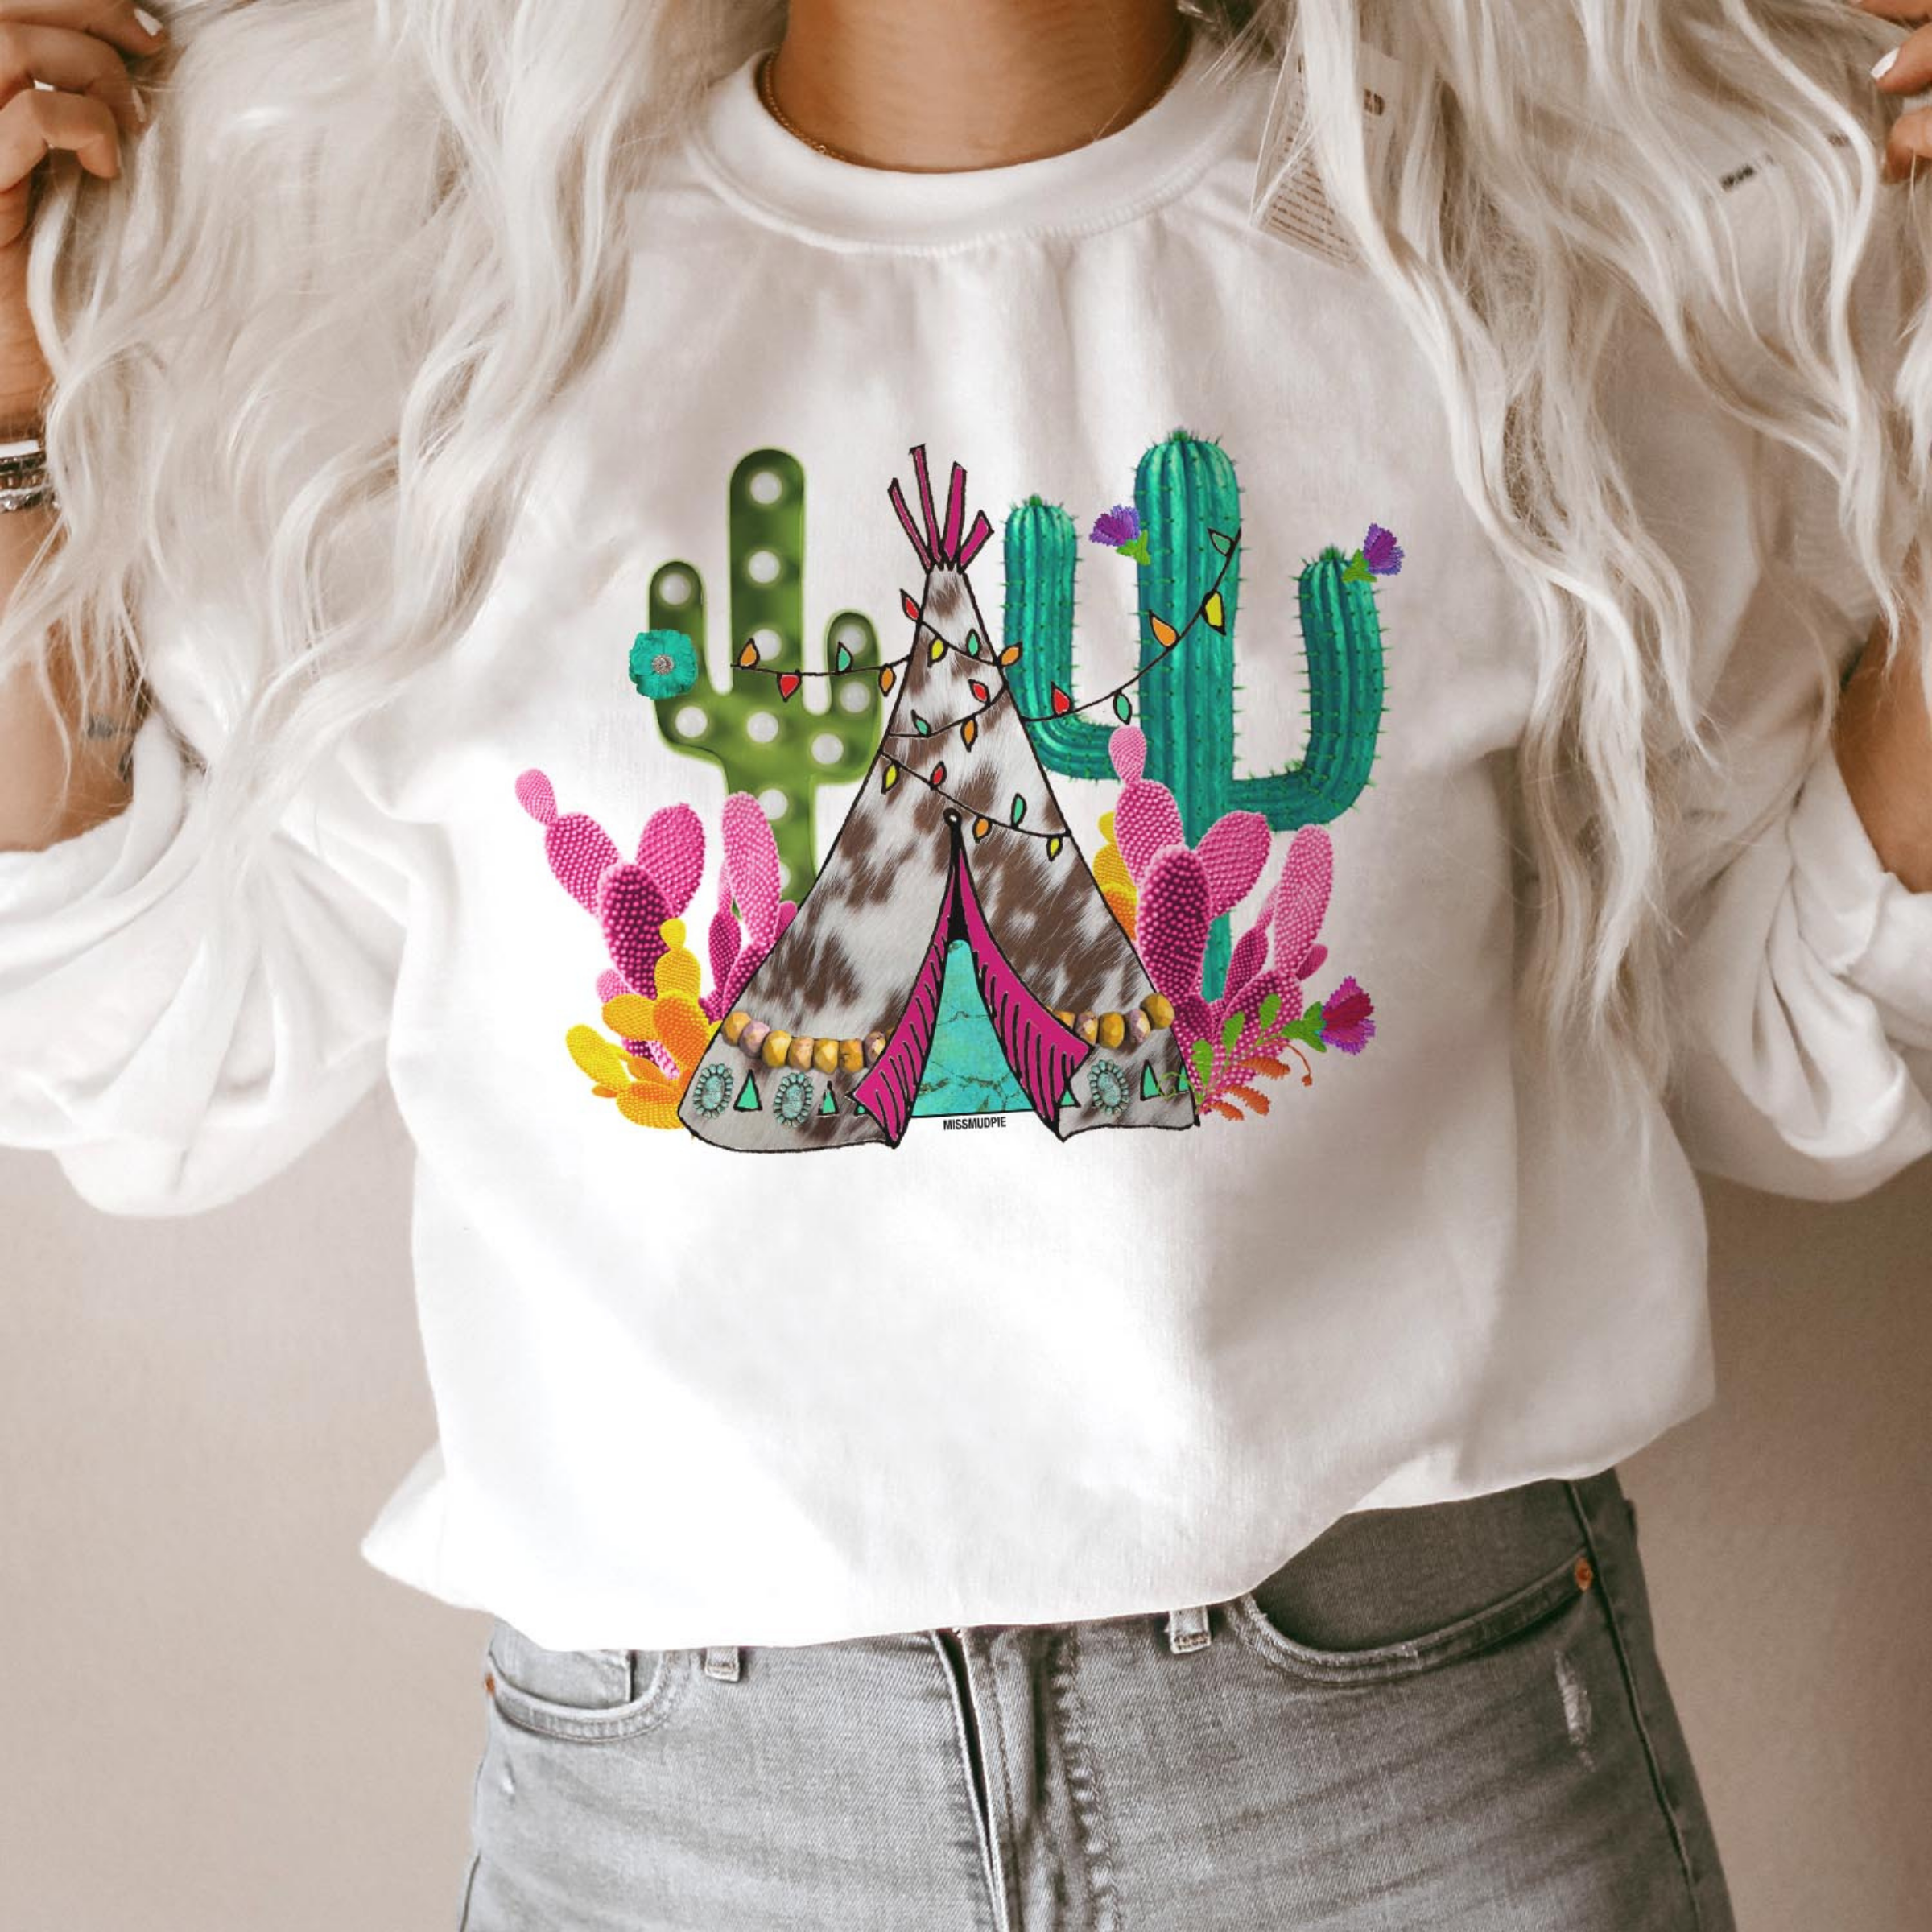 This white pullover includes a crew neckline, long sleeves, and a teepee and cactus Christmas graphic in fun, bright colors. This is modeled here with rolled sleeves and a pair of light wash denim jeans. 